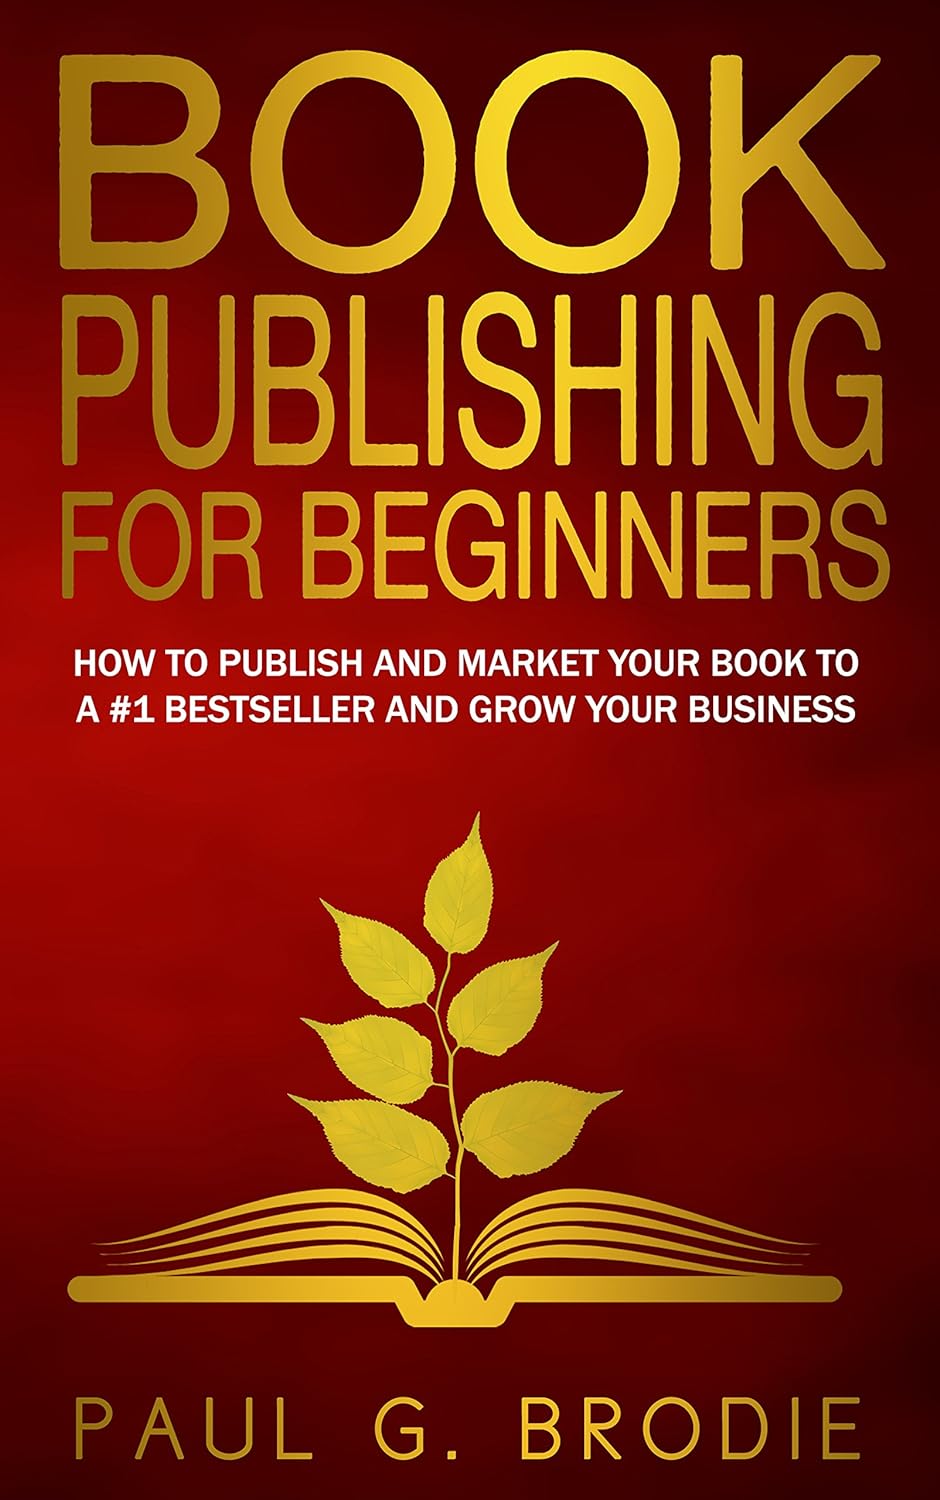 Book Publishing for Beginners How to Publish and Market Your Book to a #1 Bestseller by Paul Brodie